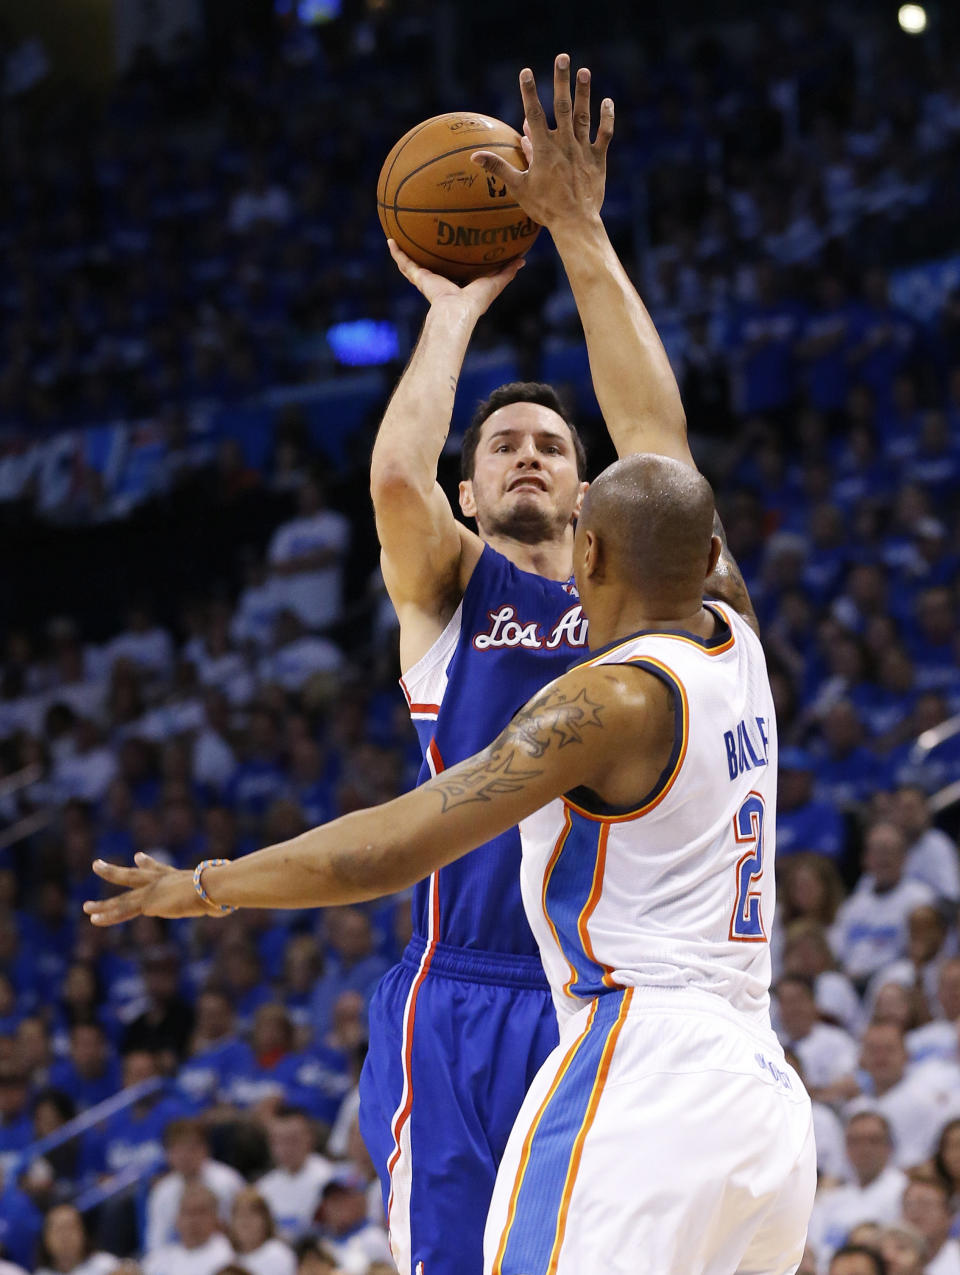 Los Angeles Clippers guard J.J. Redick shoots as Oklahoma City Thunder forward Caron Butler (2) defends in the second quarter of Game 2 of the Western Conference semifinal NBA basketball playoff series in Oklahoma City, Wednesday, May 7, 2014. (AP Photo/Sue Ogrocki)